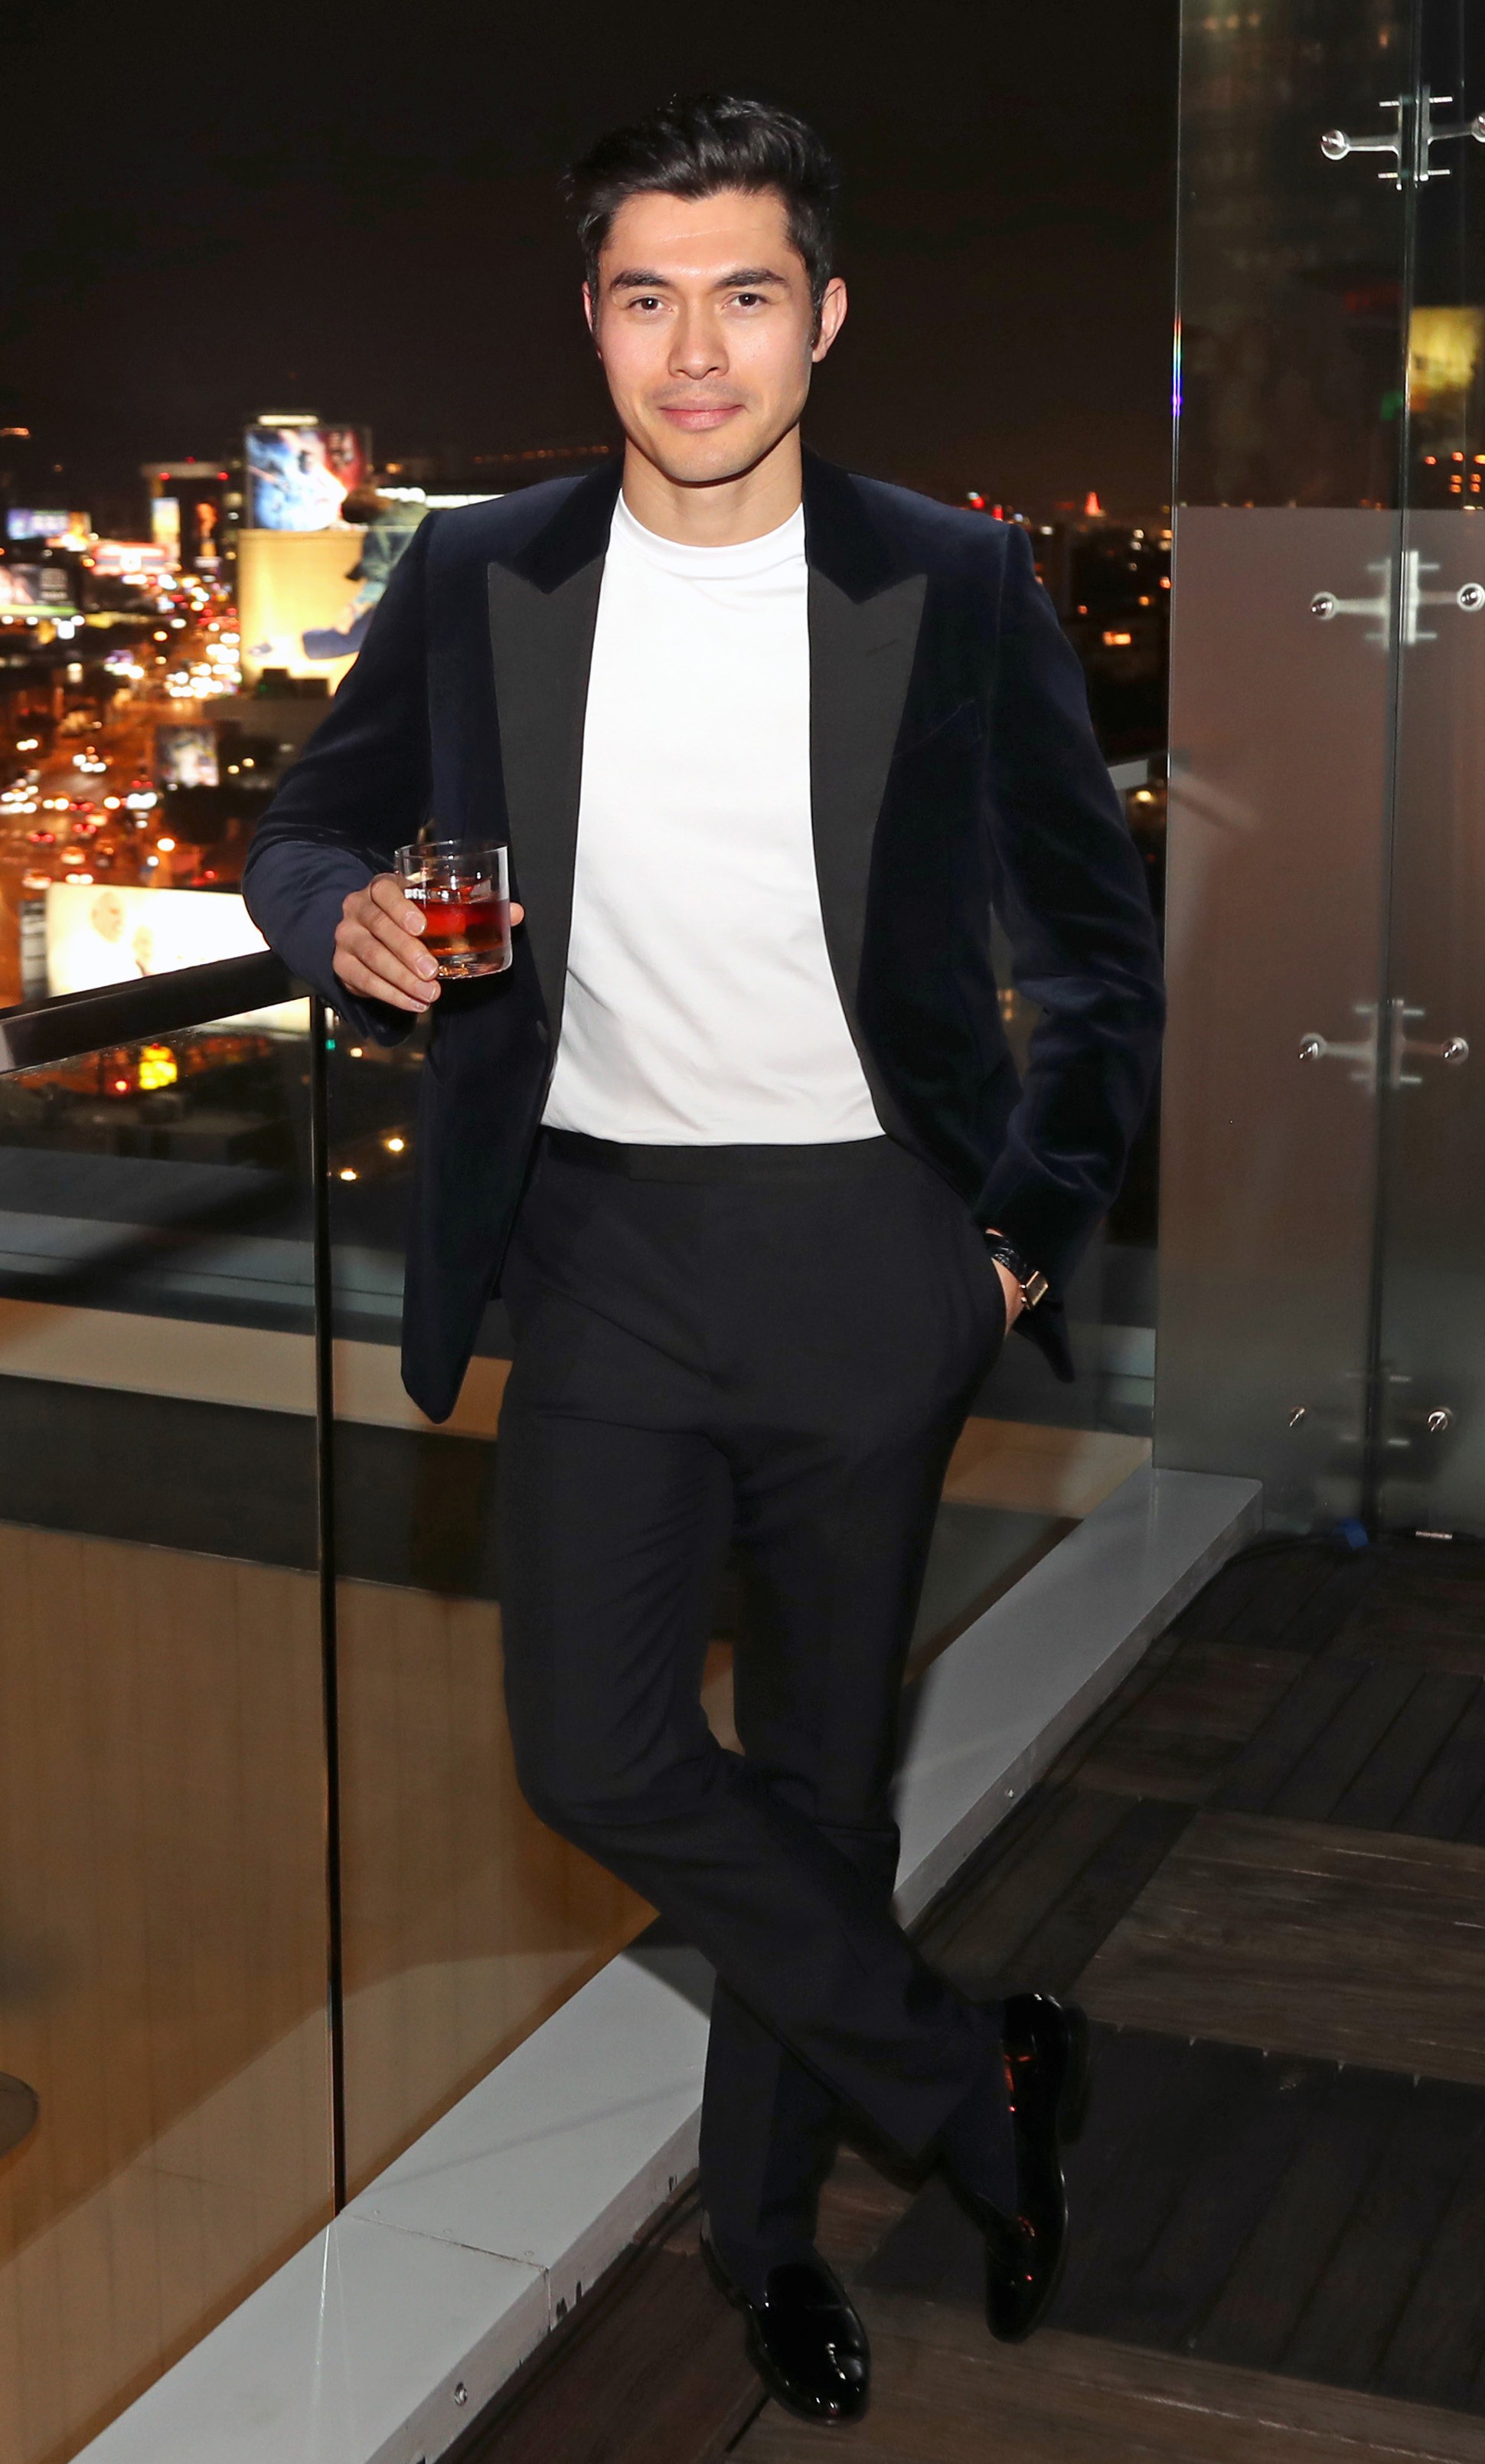 WEST HOLLYWOOD, CALIFORNIA - DECEMBER 10: Actor Henry Golding, Hennessy’s Prestige & Rare Cognac Collection ambassador, attends the brand’s “Greatness is an Odyssey” content series premiere. Produced by Hennessy, the short films chronicle Henry Golding’s  (Foto: Getty Images for Hennessy)